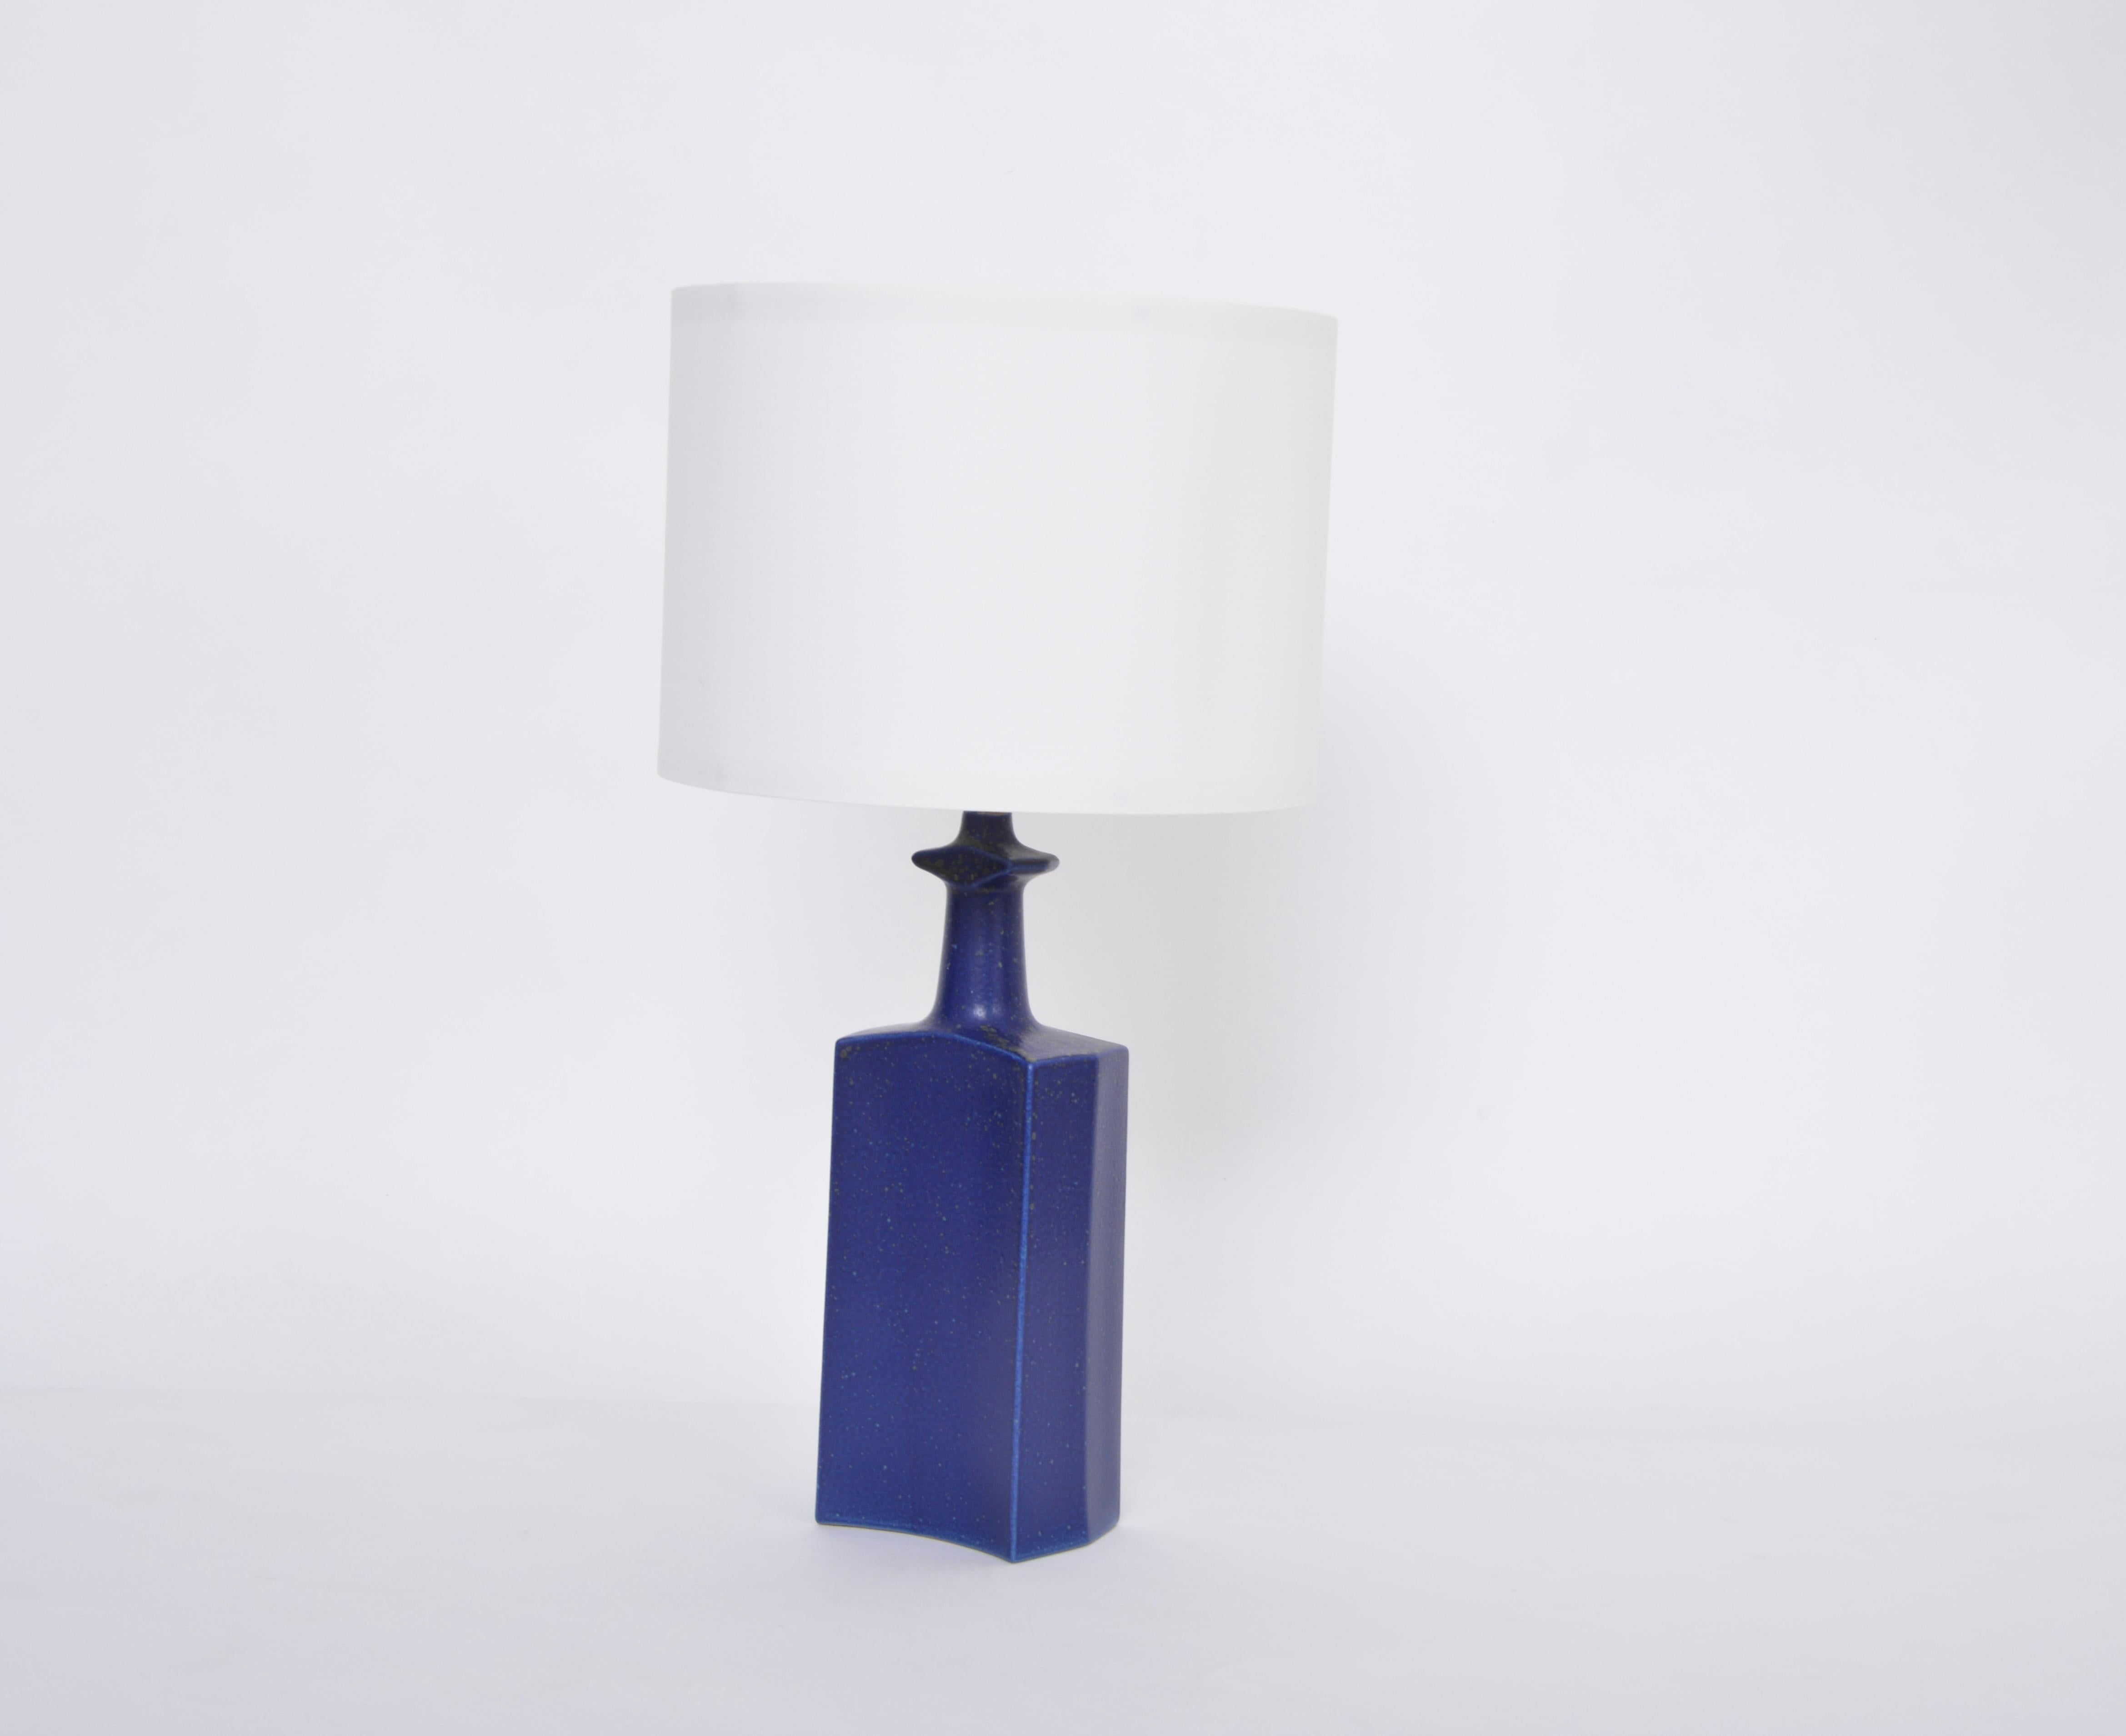 Blue Danish Mid-Century Modern Ceramic Table Lamp by Atelier Knabstrup In Excellent Condition For Sale In Berlin, DE